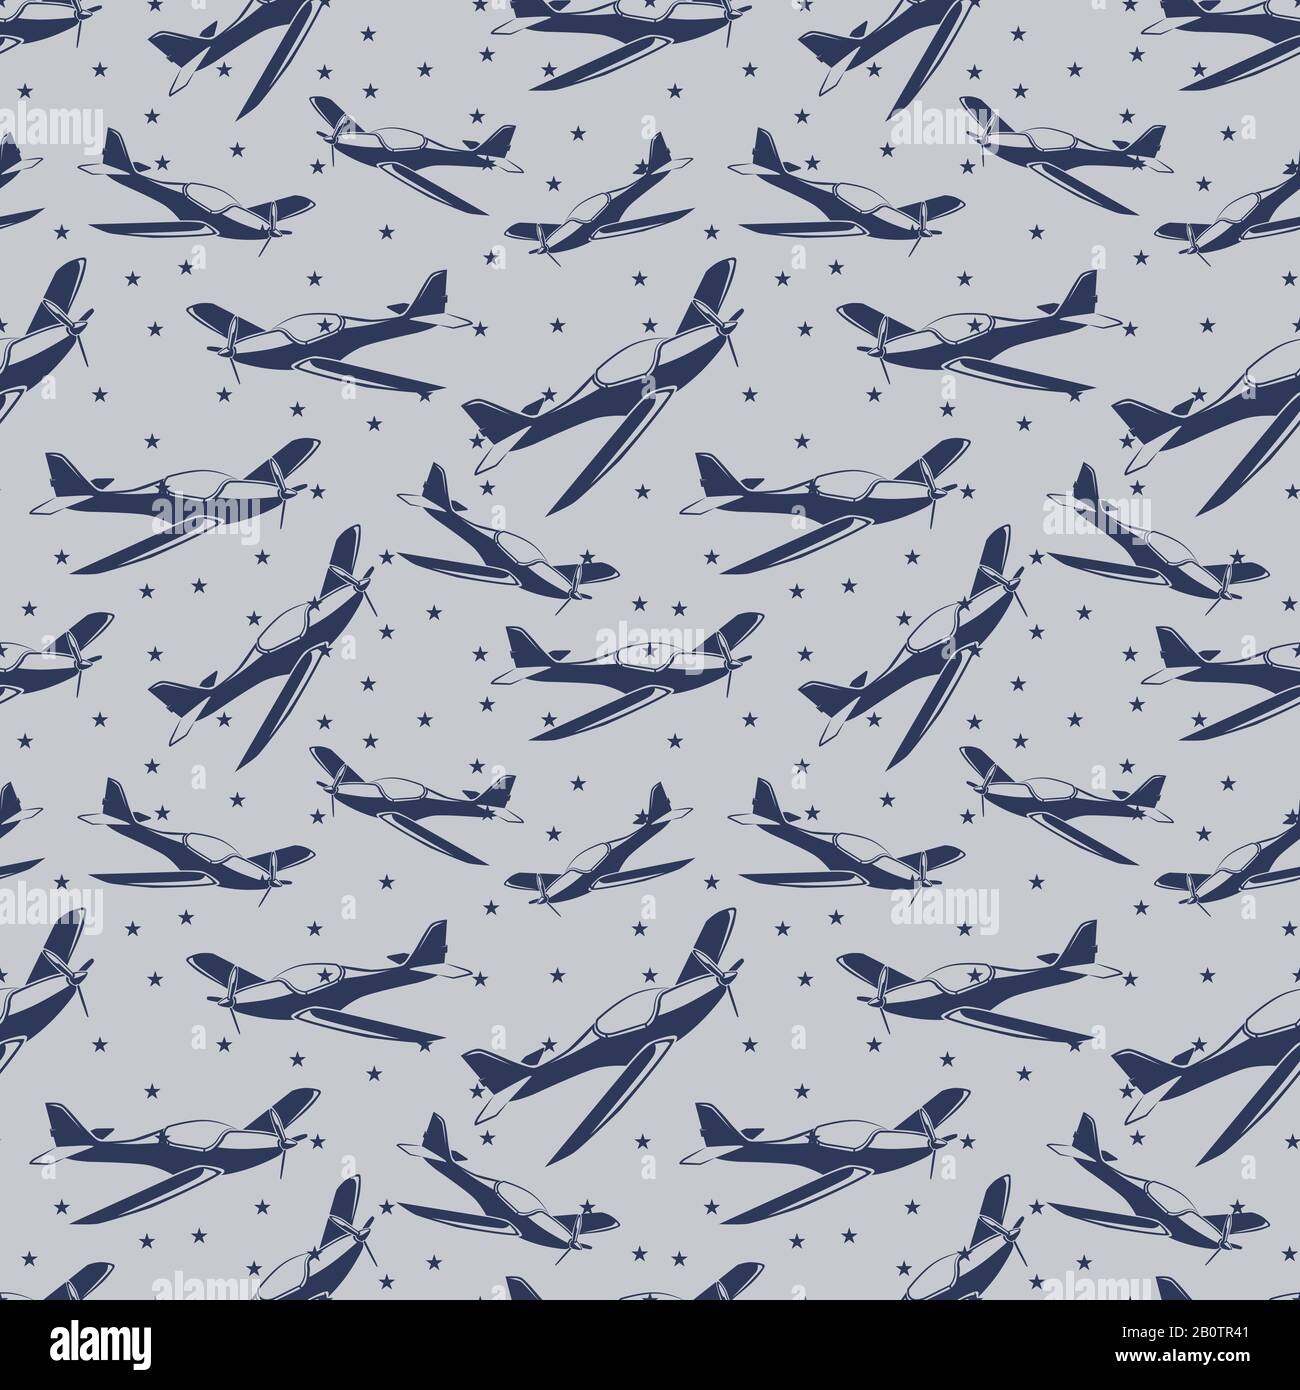 Stars and airplanes seamless pattern design - avia seamless texture. Vector illustration Stock Vector